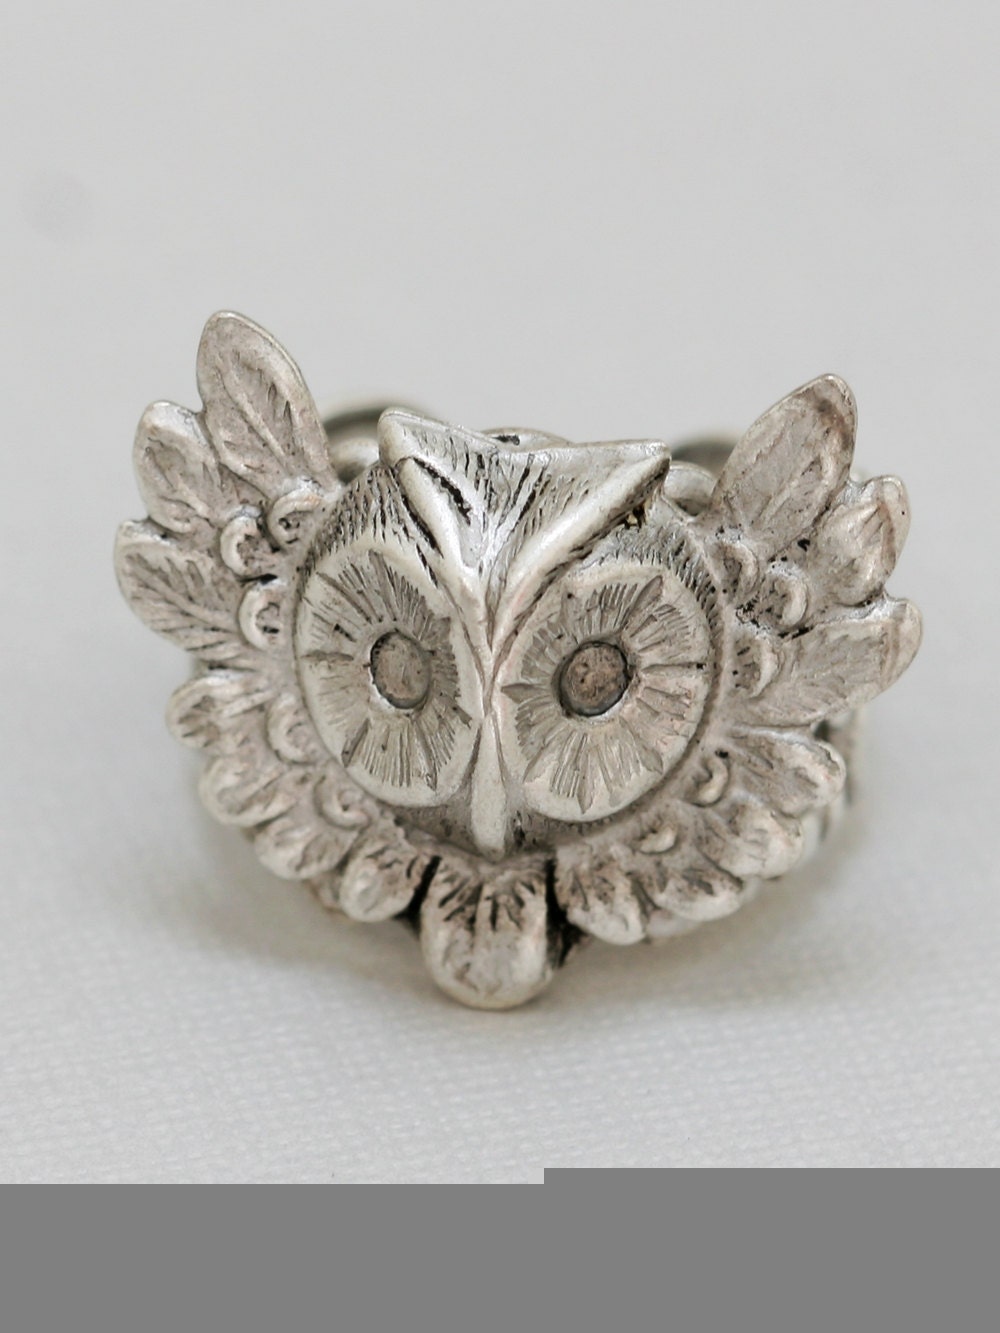 Steampunk Owl Ring, Silver Ring, Adjustable Metal Band, Vintage Inspired Ring